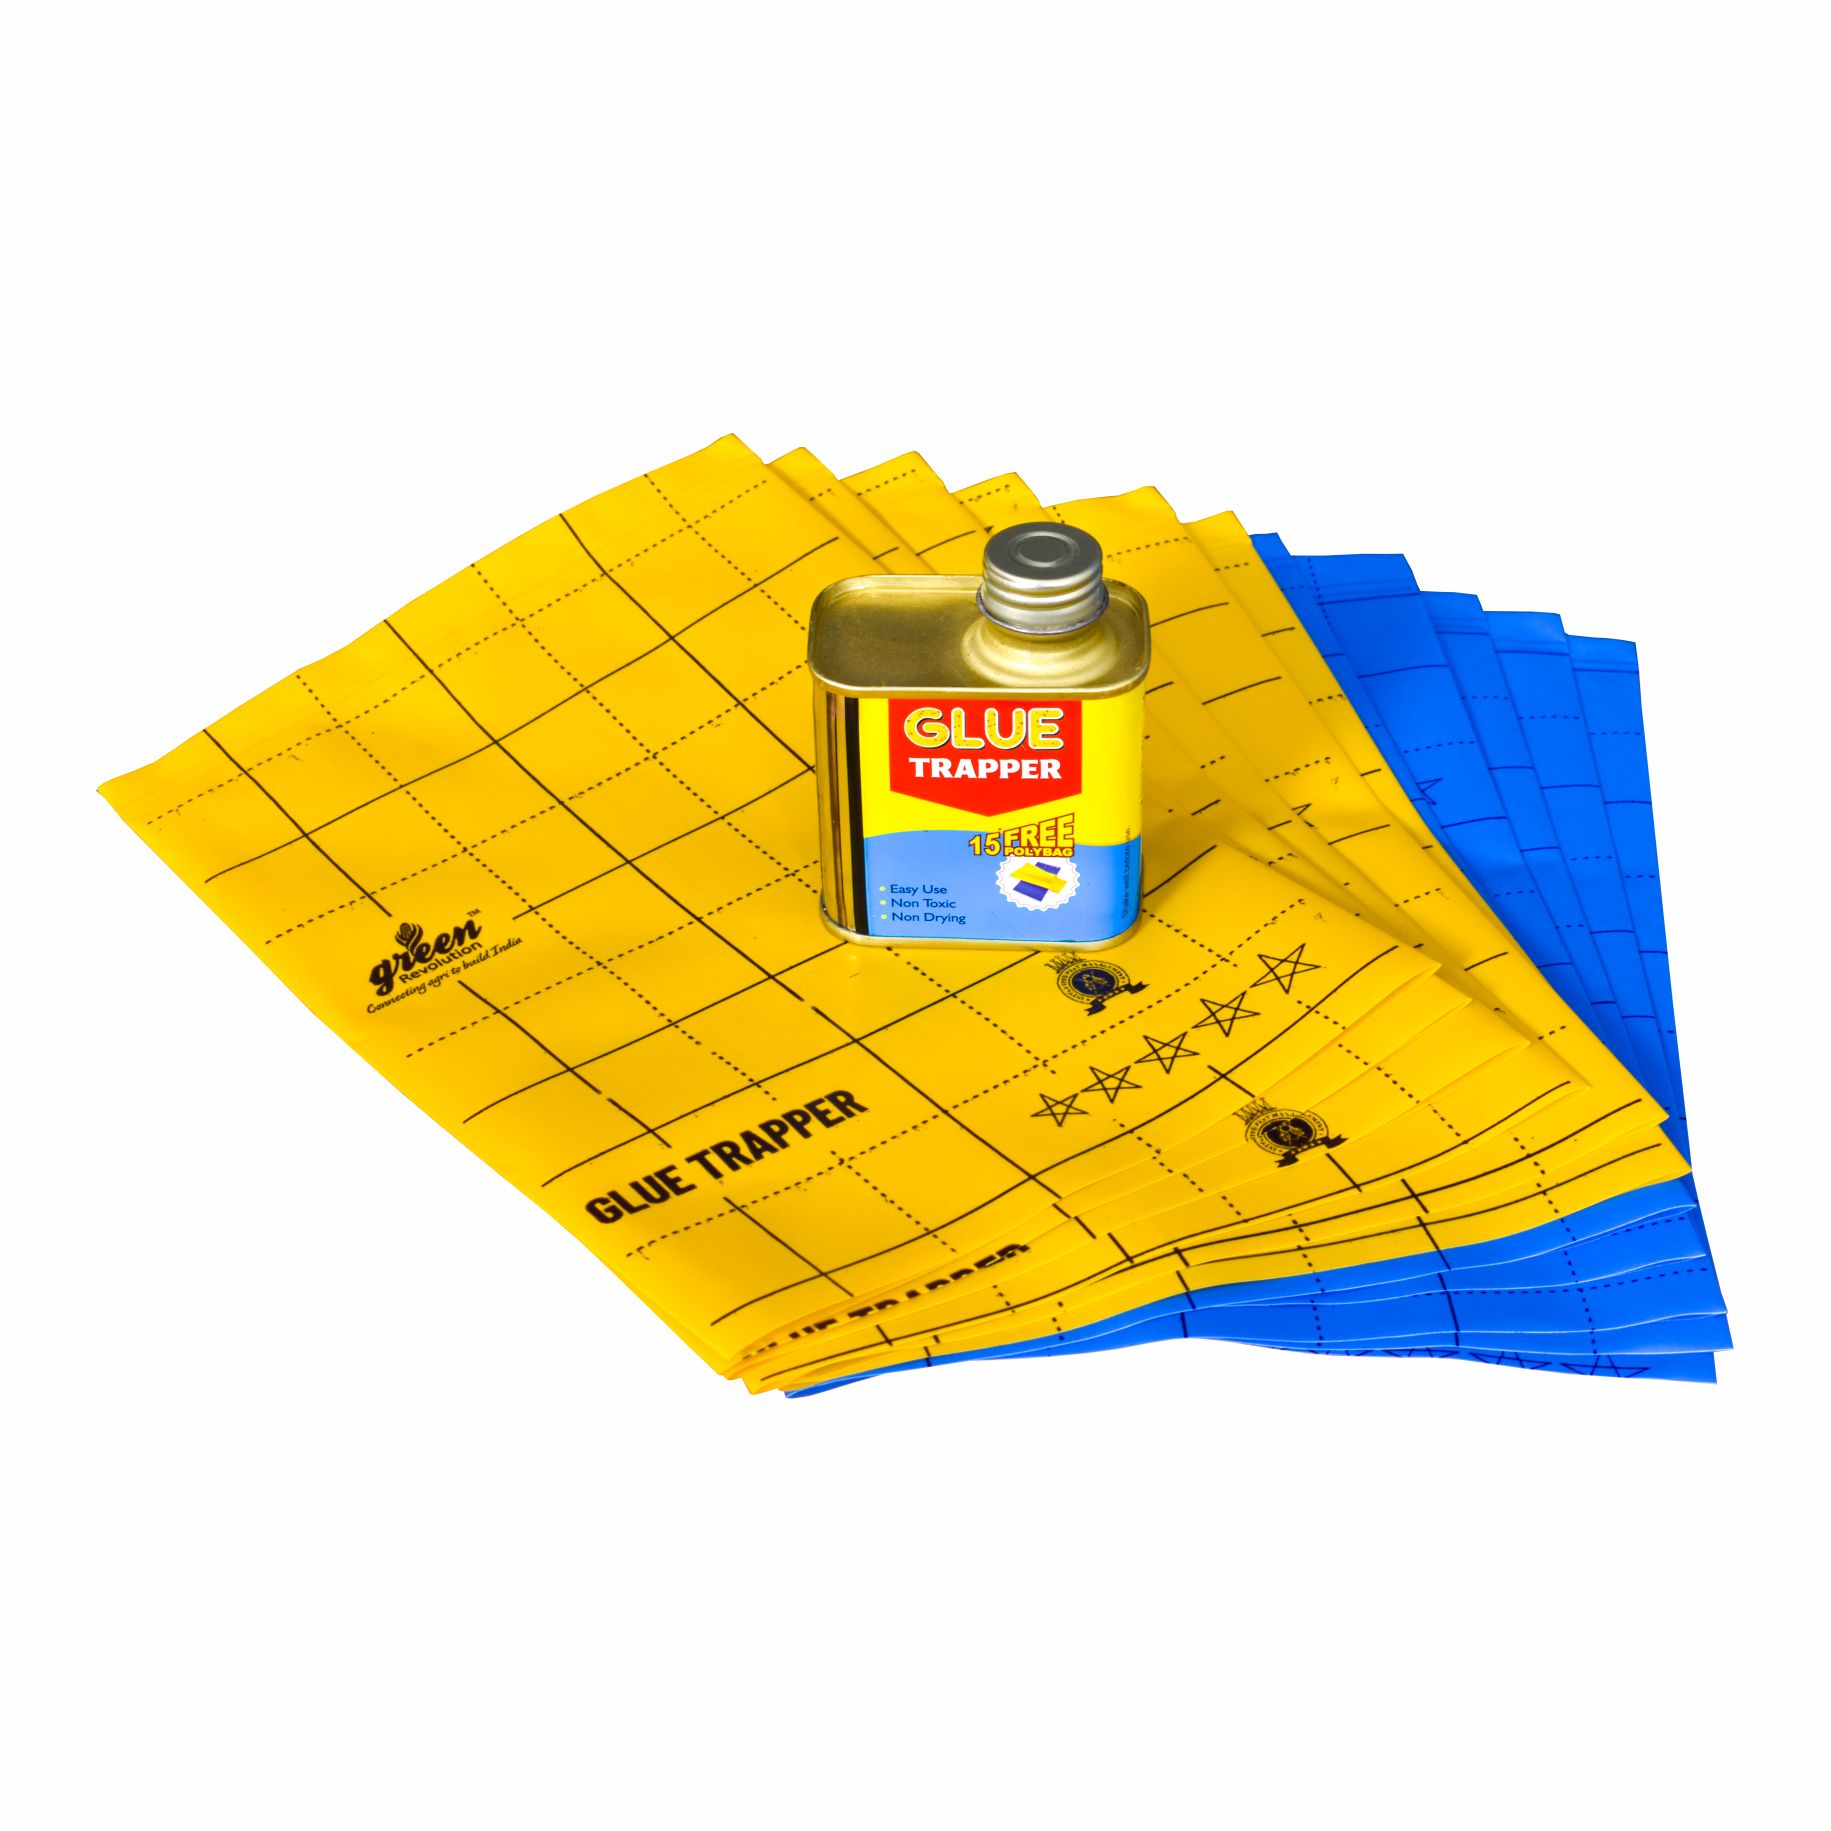 Glue Trapper 100ml with *15 free Polybag ( Unit 1 )